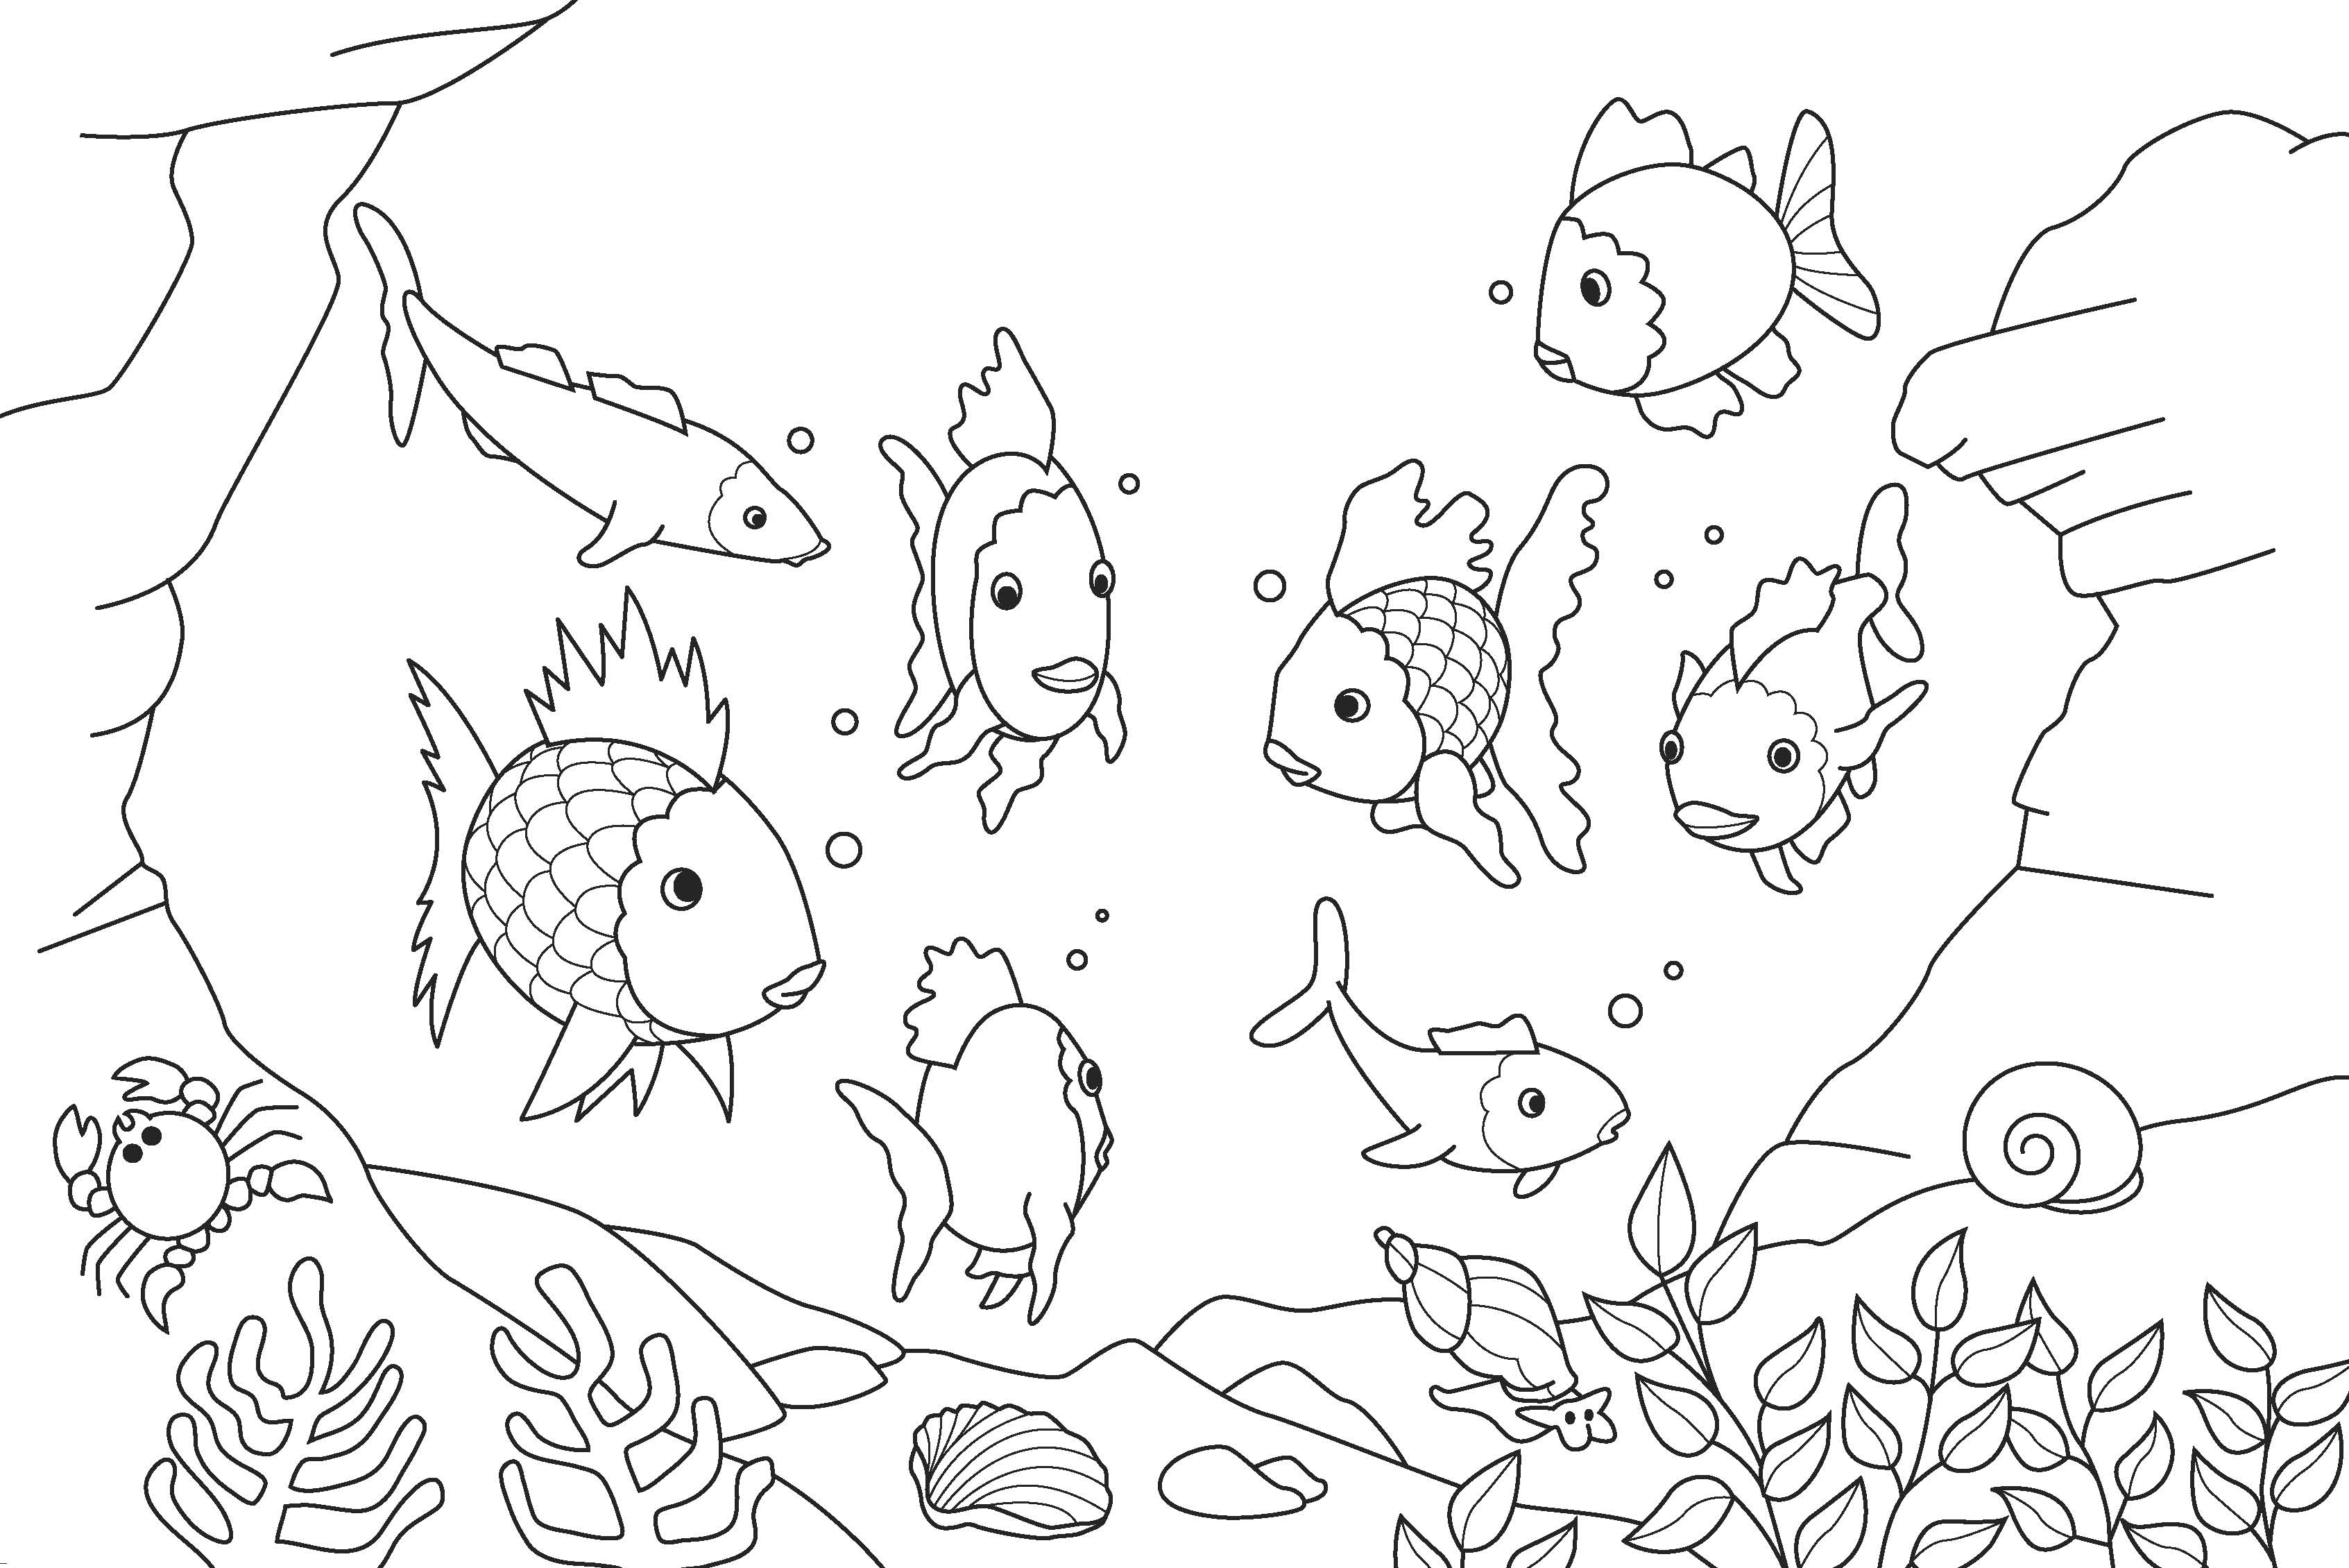  Fish Coloring Pages | print coloring pages | Kids printable coloring pages | #16